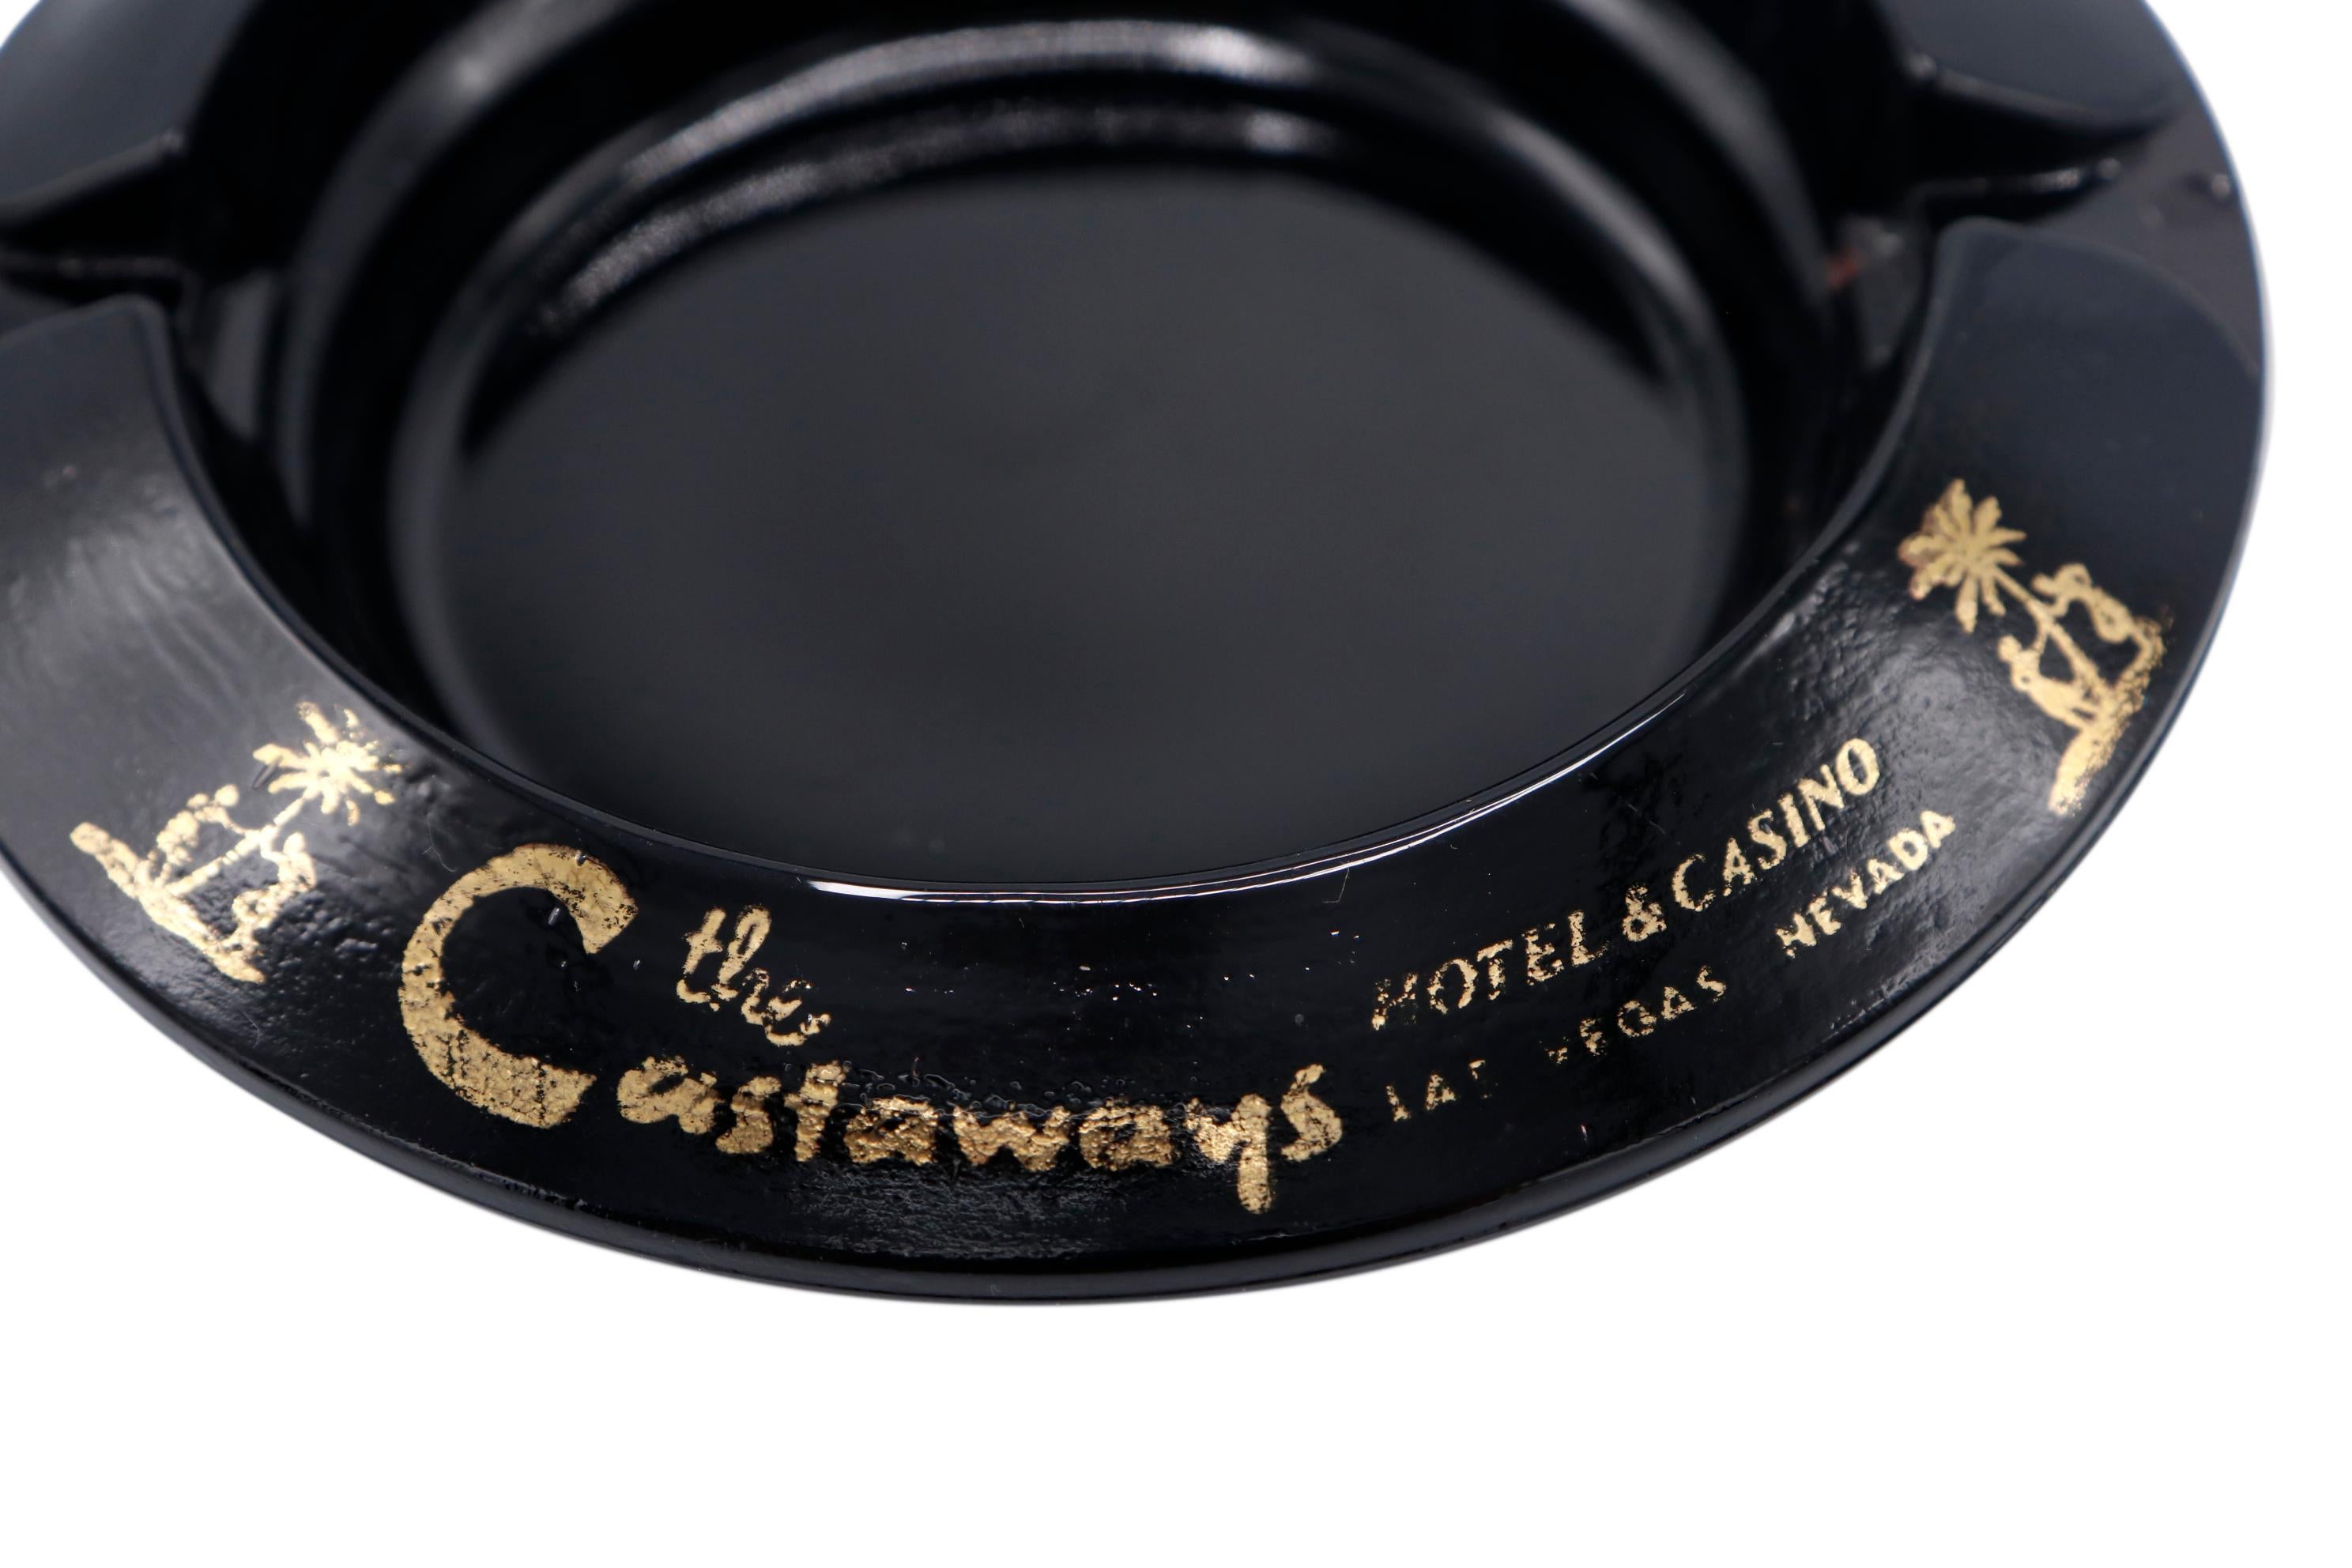 A black glass ashtray from The Castaways Hotel, a hotel and casino in Paradise, Las Vegas, Nevada. The lip is printed with the Castaways logo. The hotel, permanently closed in 1987, was opened in 1963 and purchased in 1967 by billionaire Howard